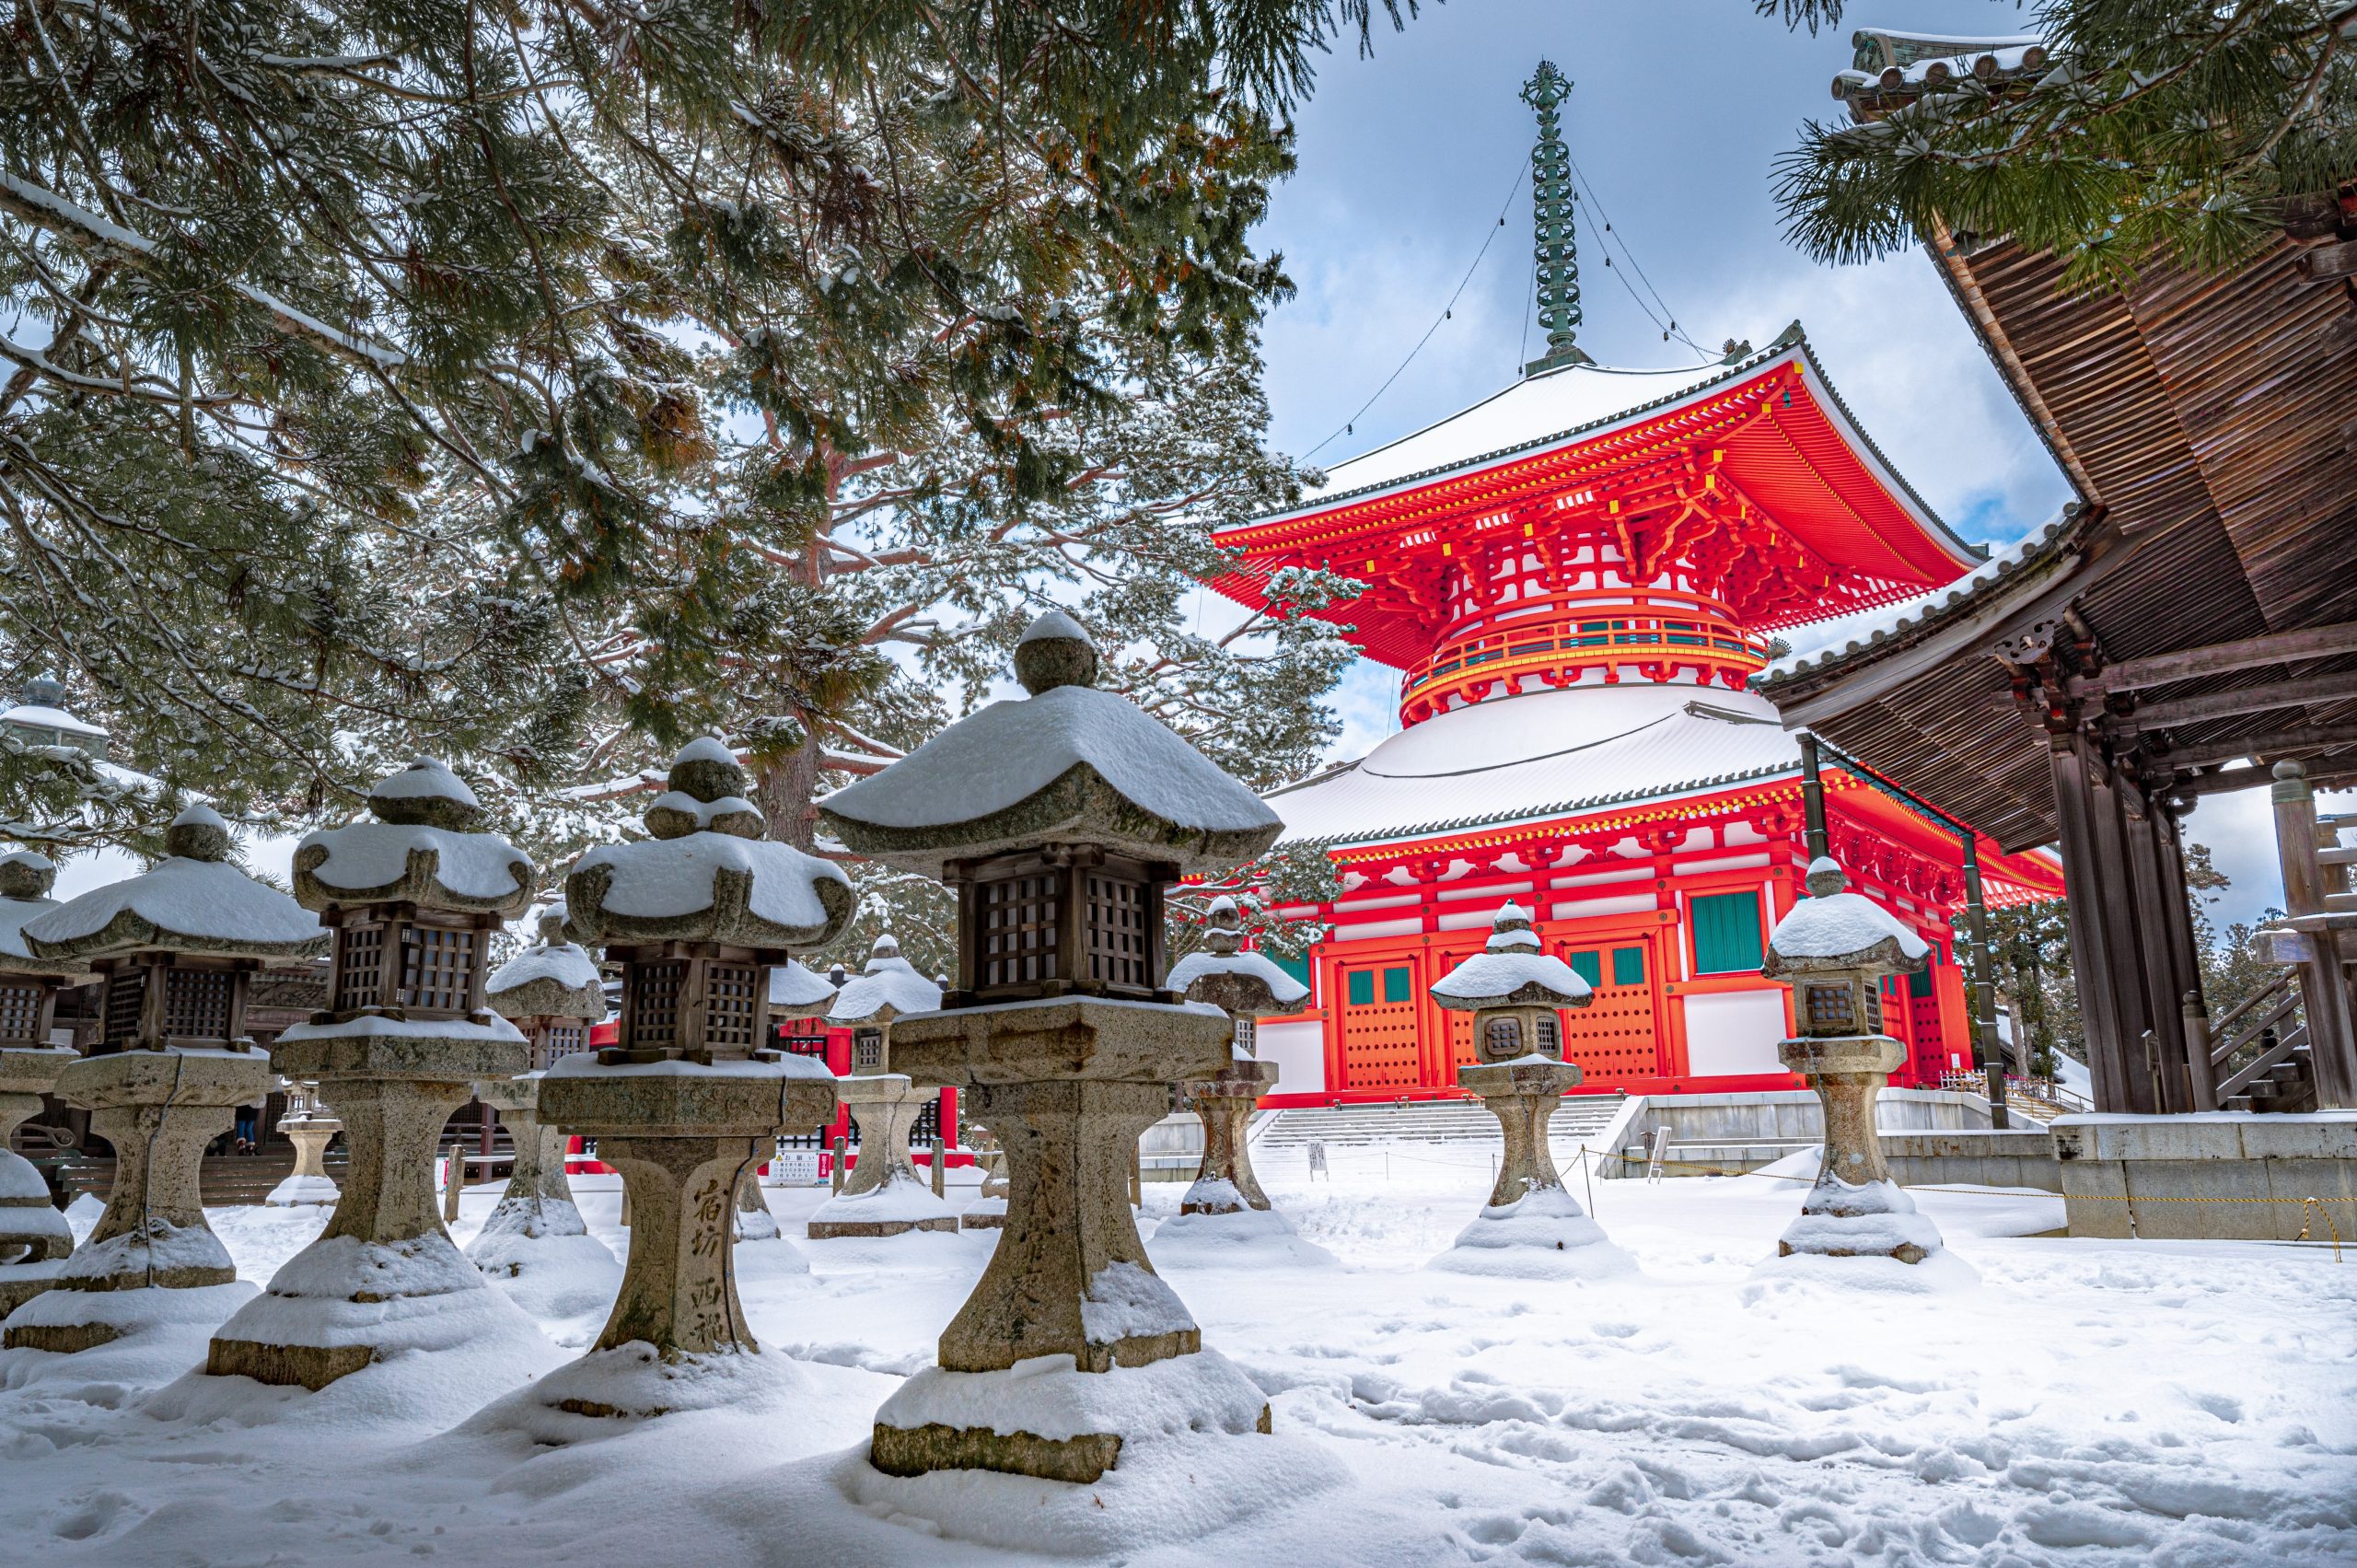 visit Japan in the winter